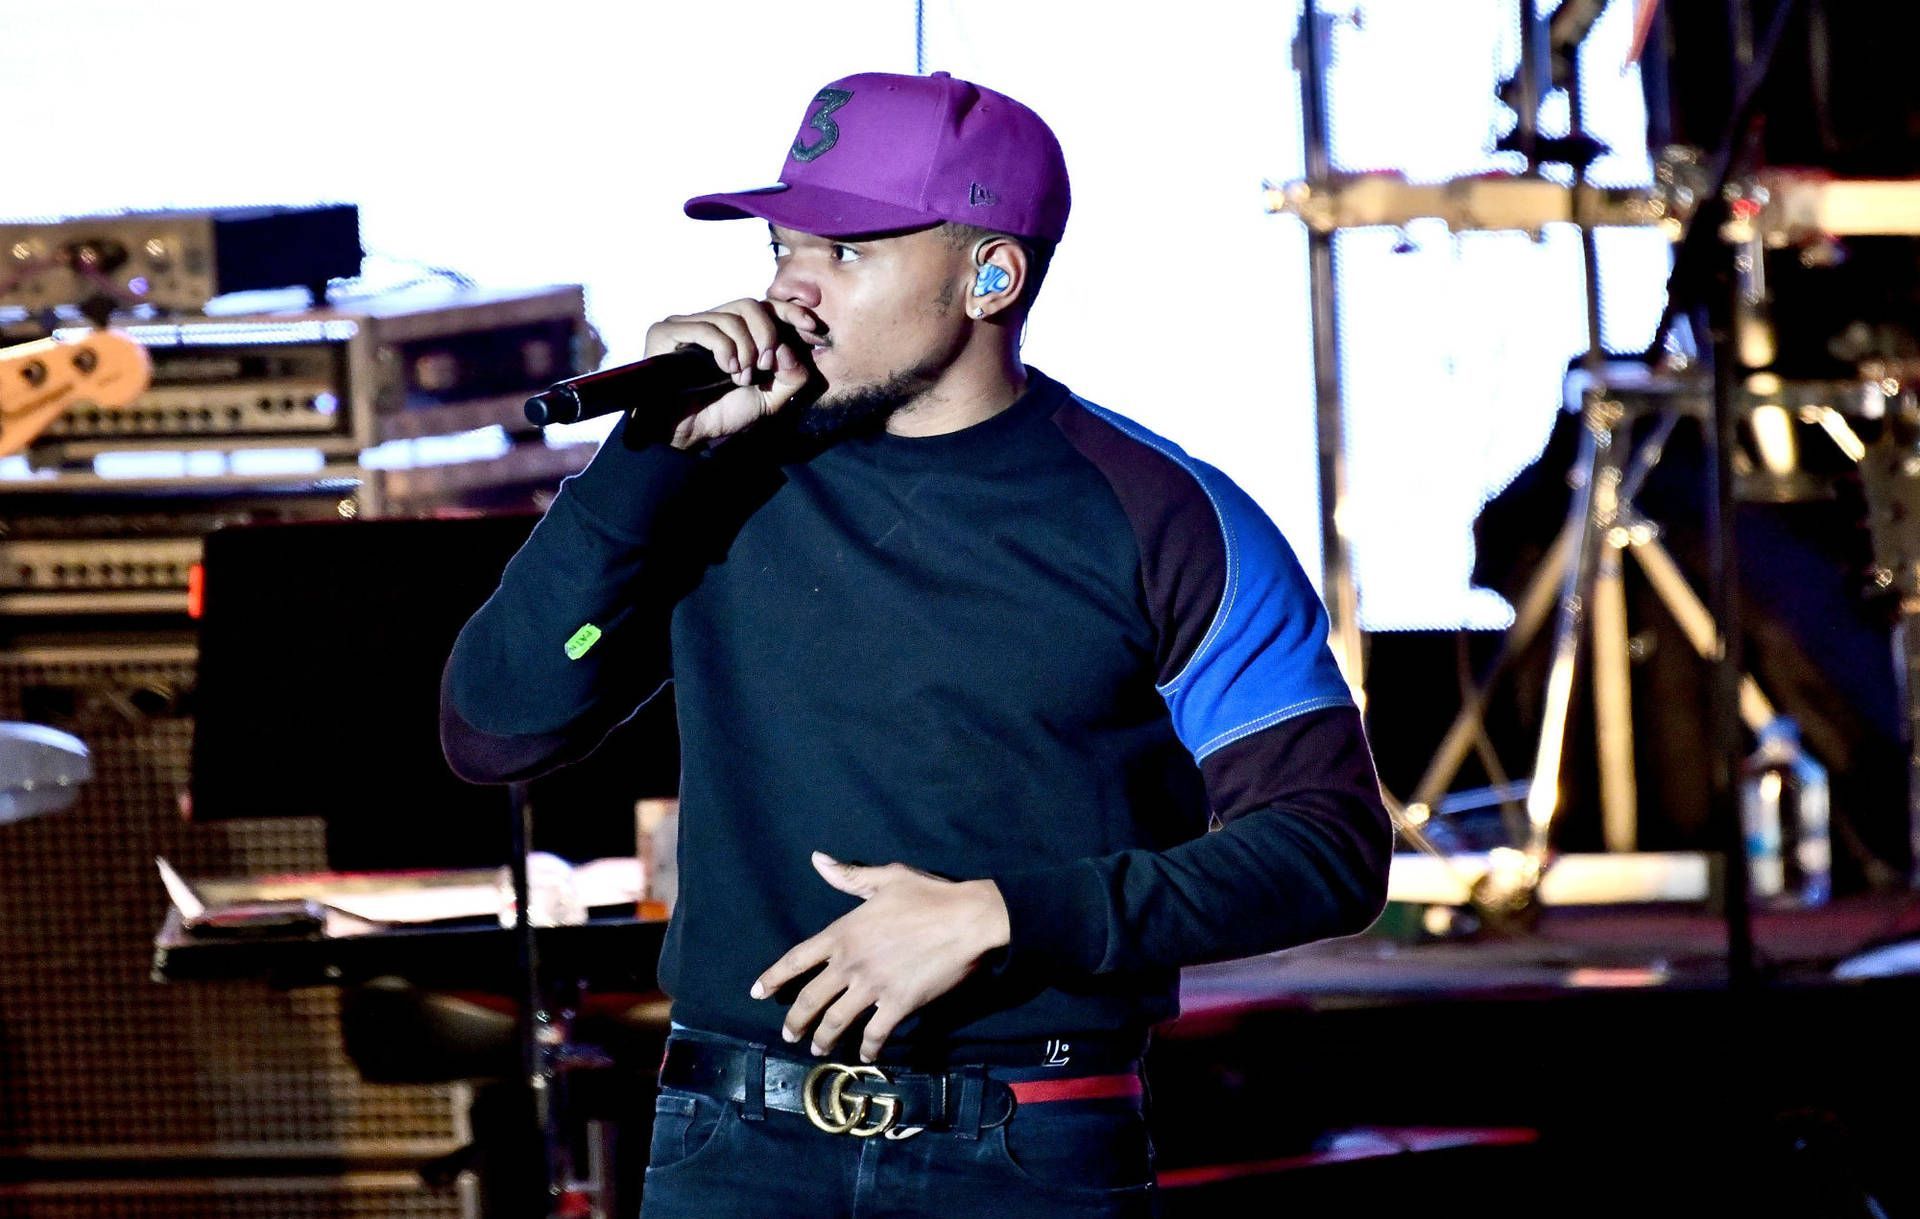 A man in black and purple clothing singing into microphone - Chance the Rapper